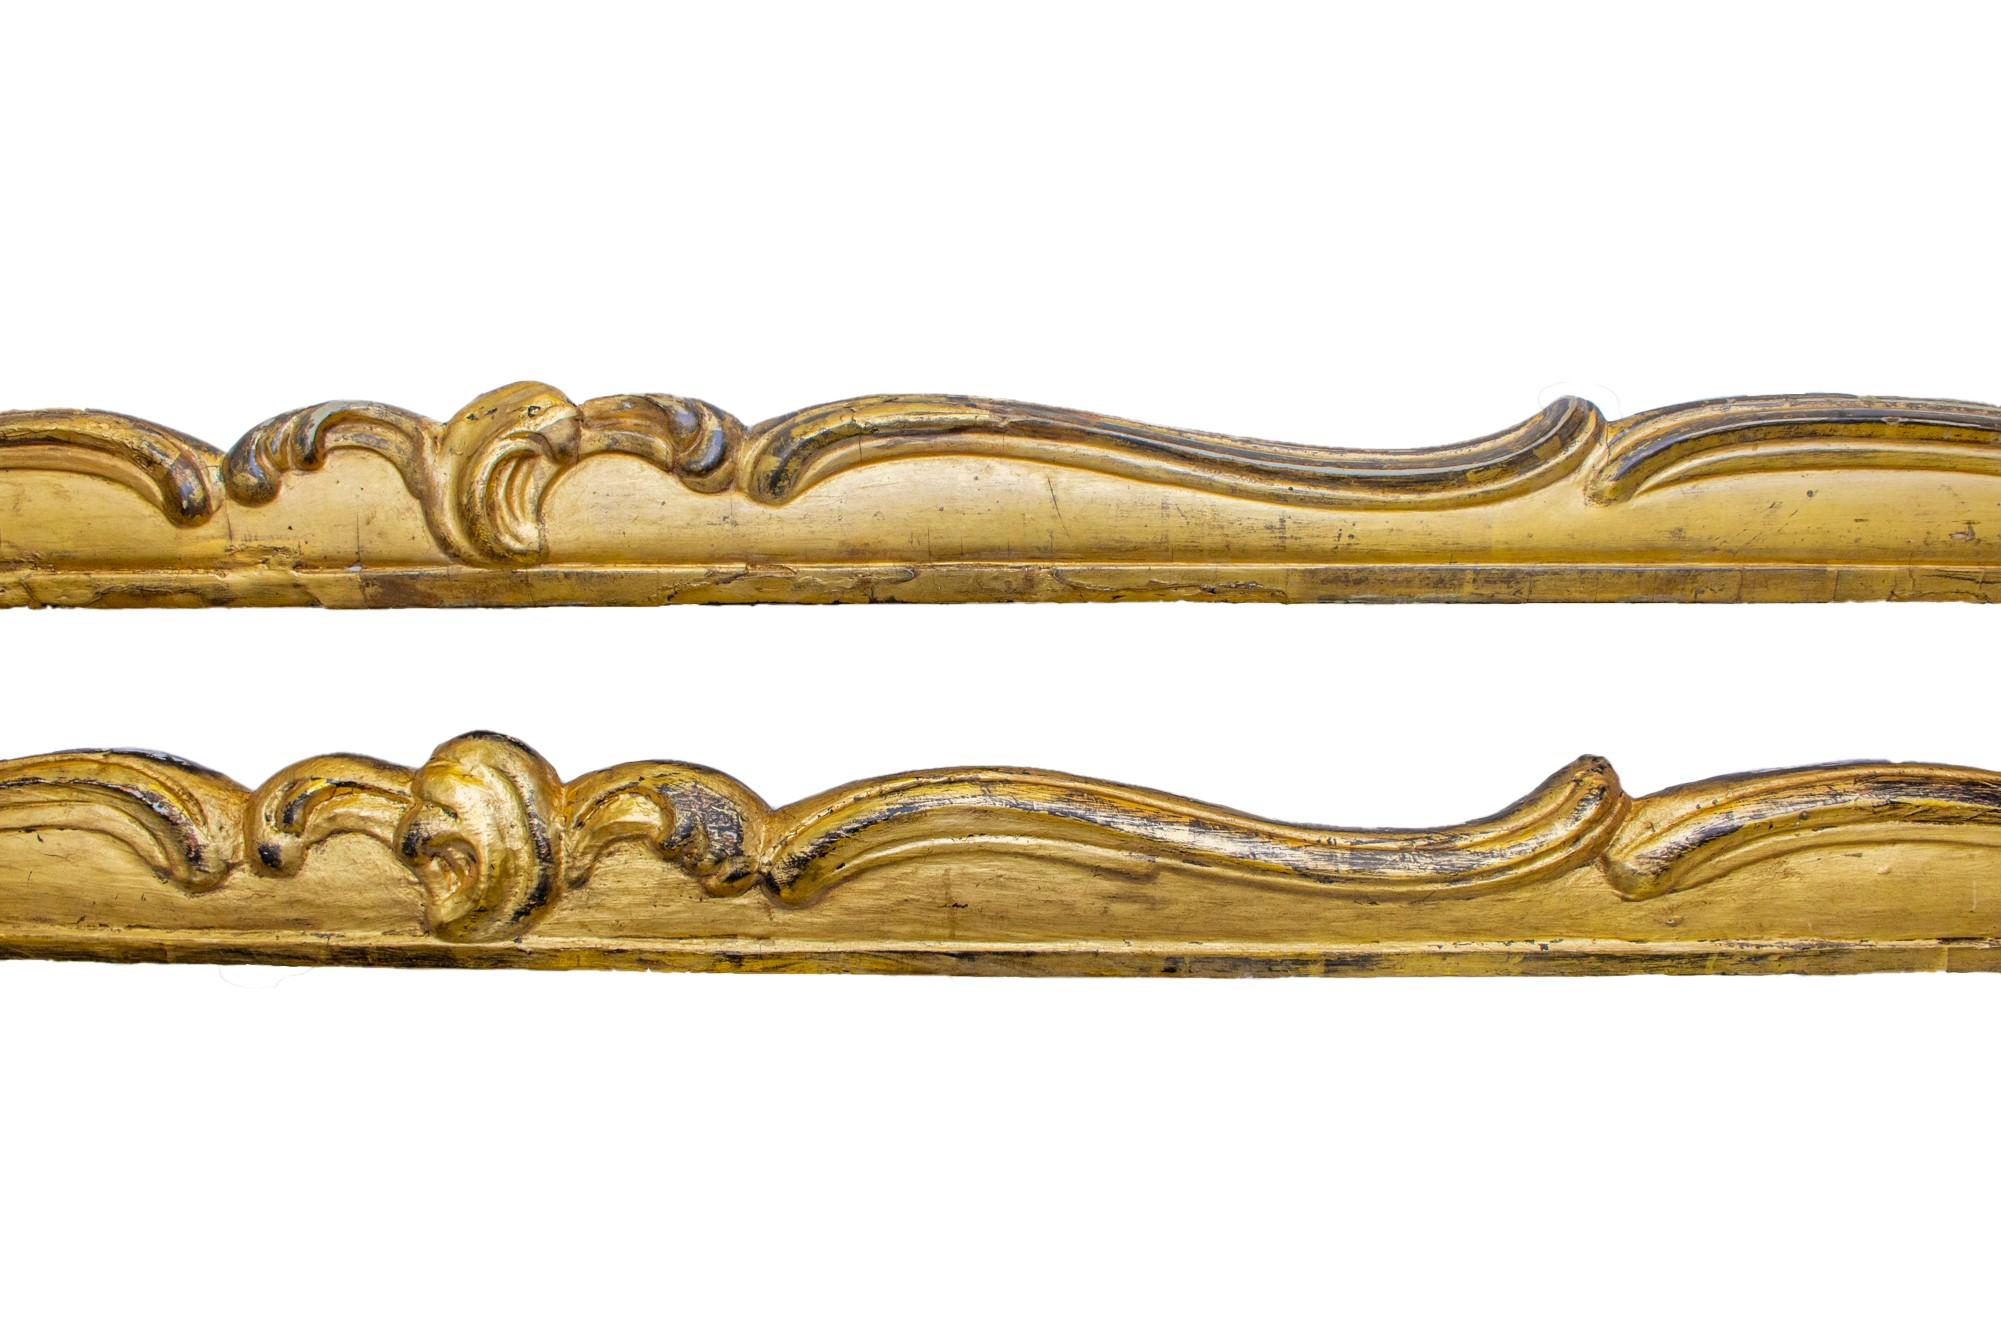 Pair of 18th century Irish Georgian water-gilt gold leaf curtain pelmets. They are from a stately home in Ireland and they have intricate and detailed wood carvings.